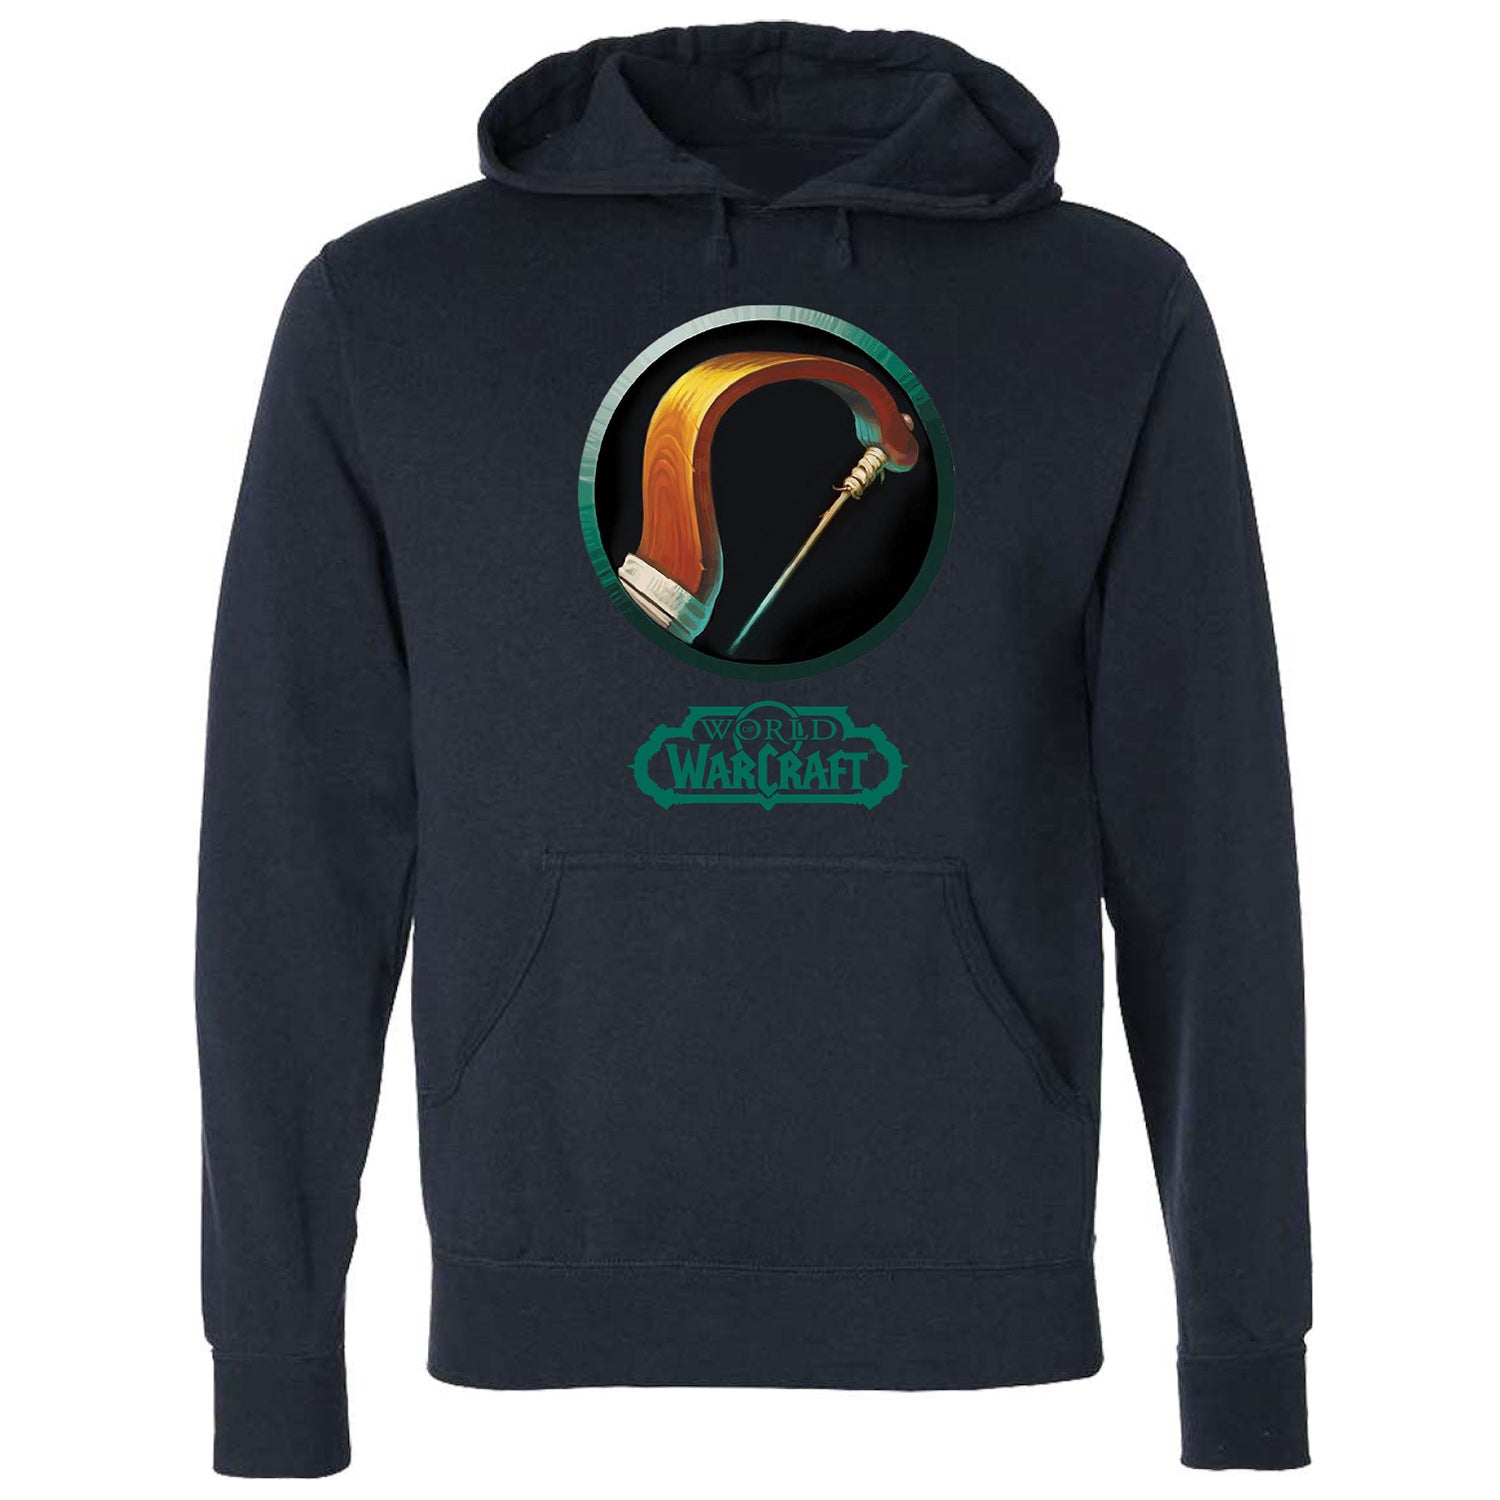 World of Warcraft Hunter Hoodie - Front View Navy Version